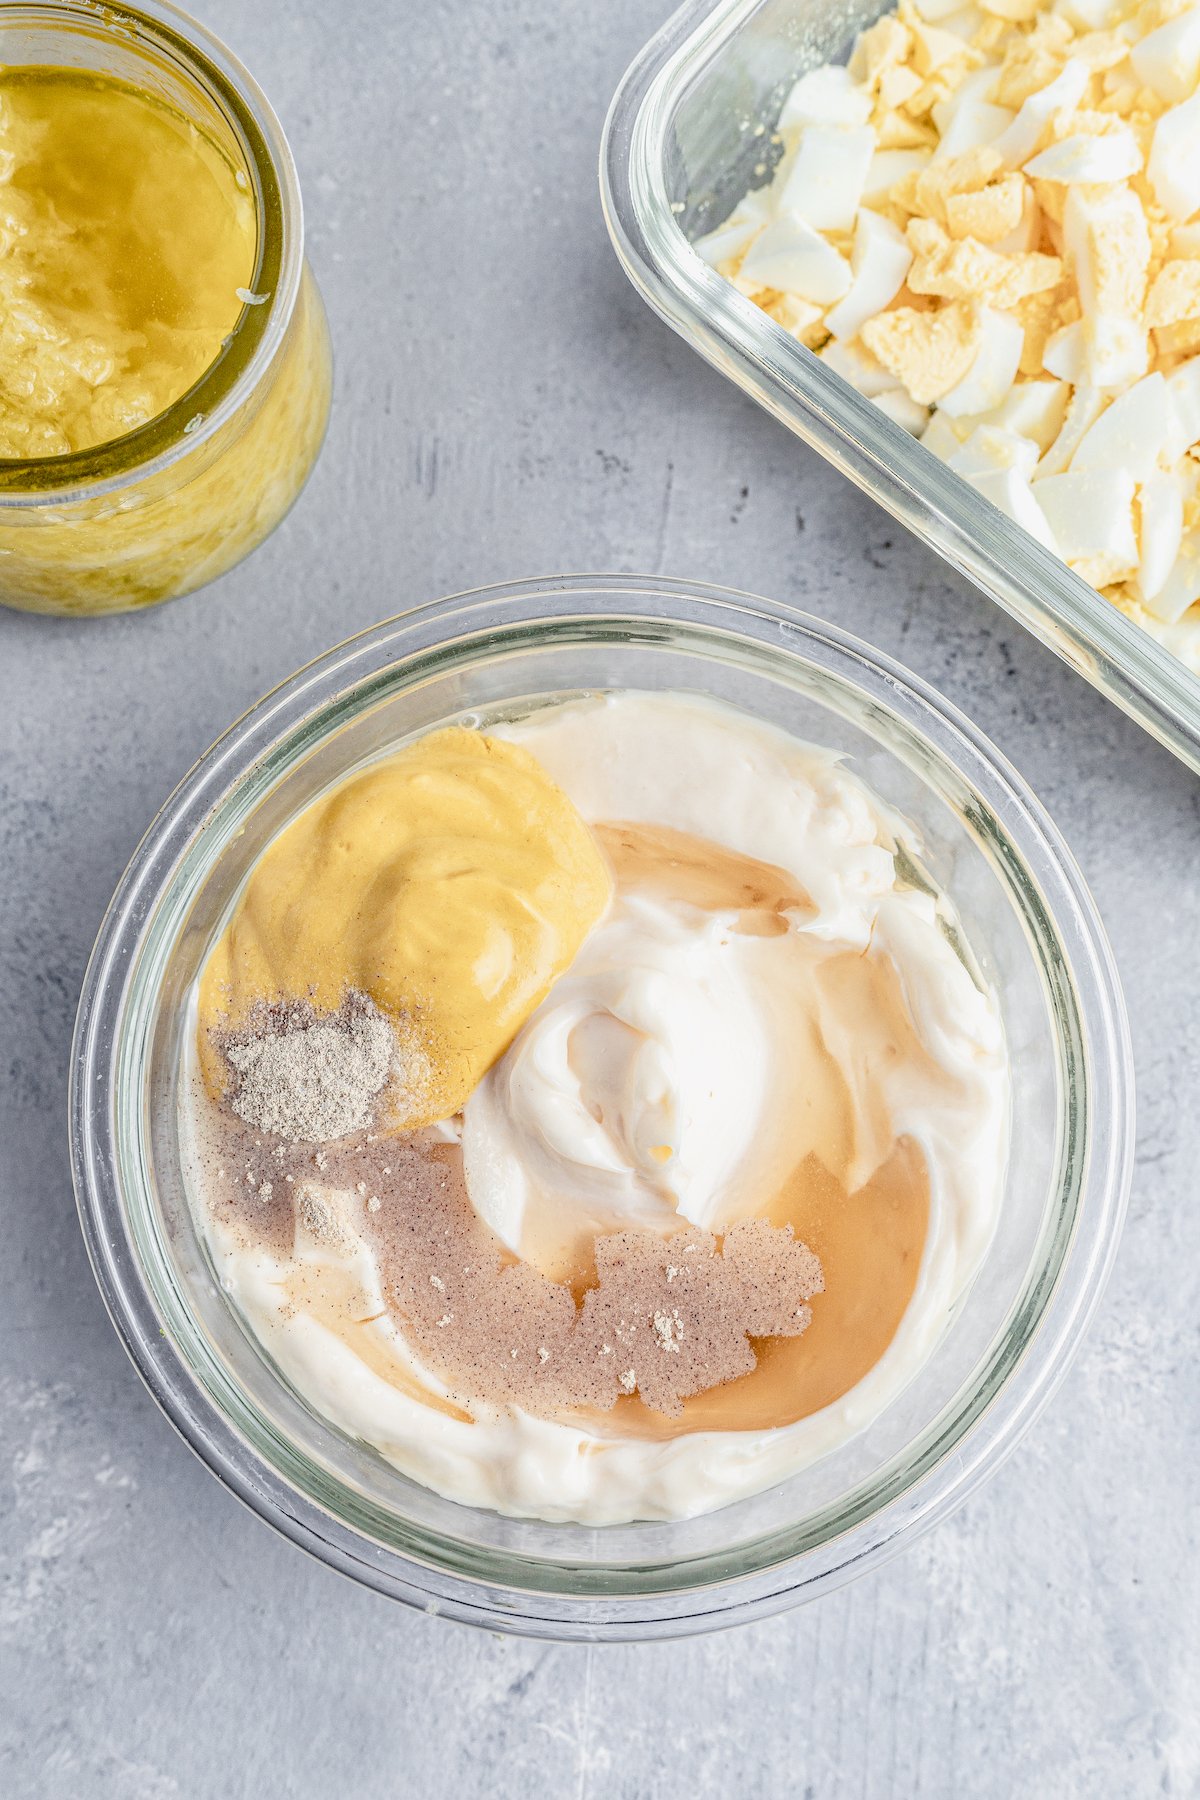 Mayonnaise, mustard, salt, pepper, and other dressing ingredients in a glass bowl.